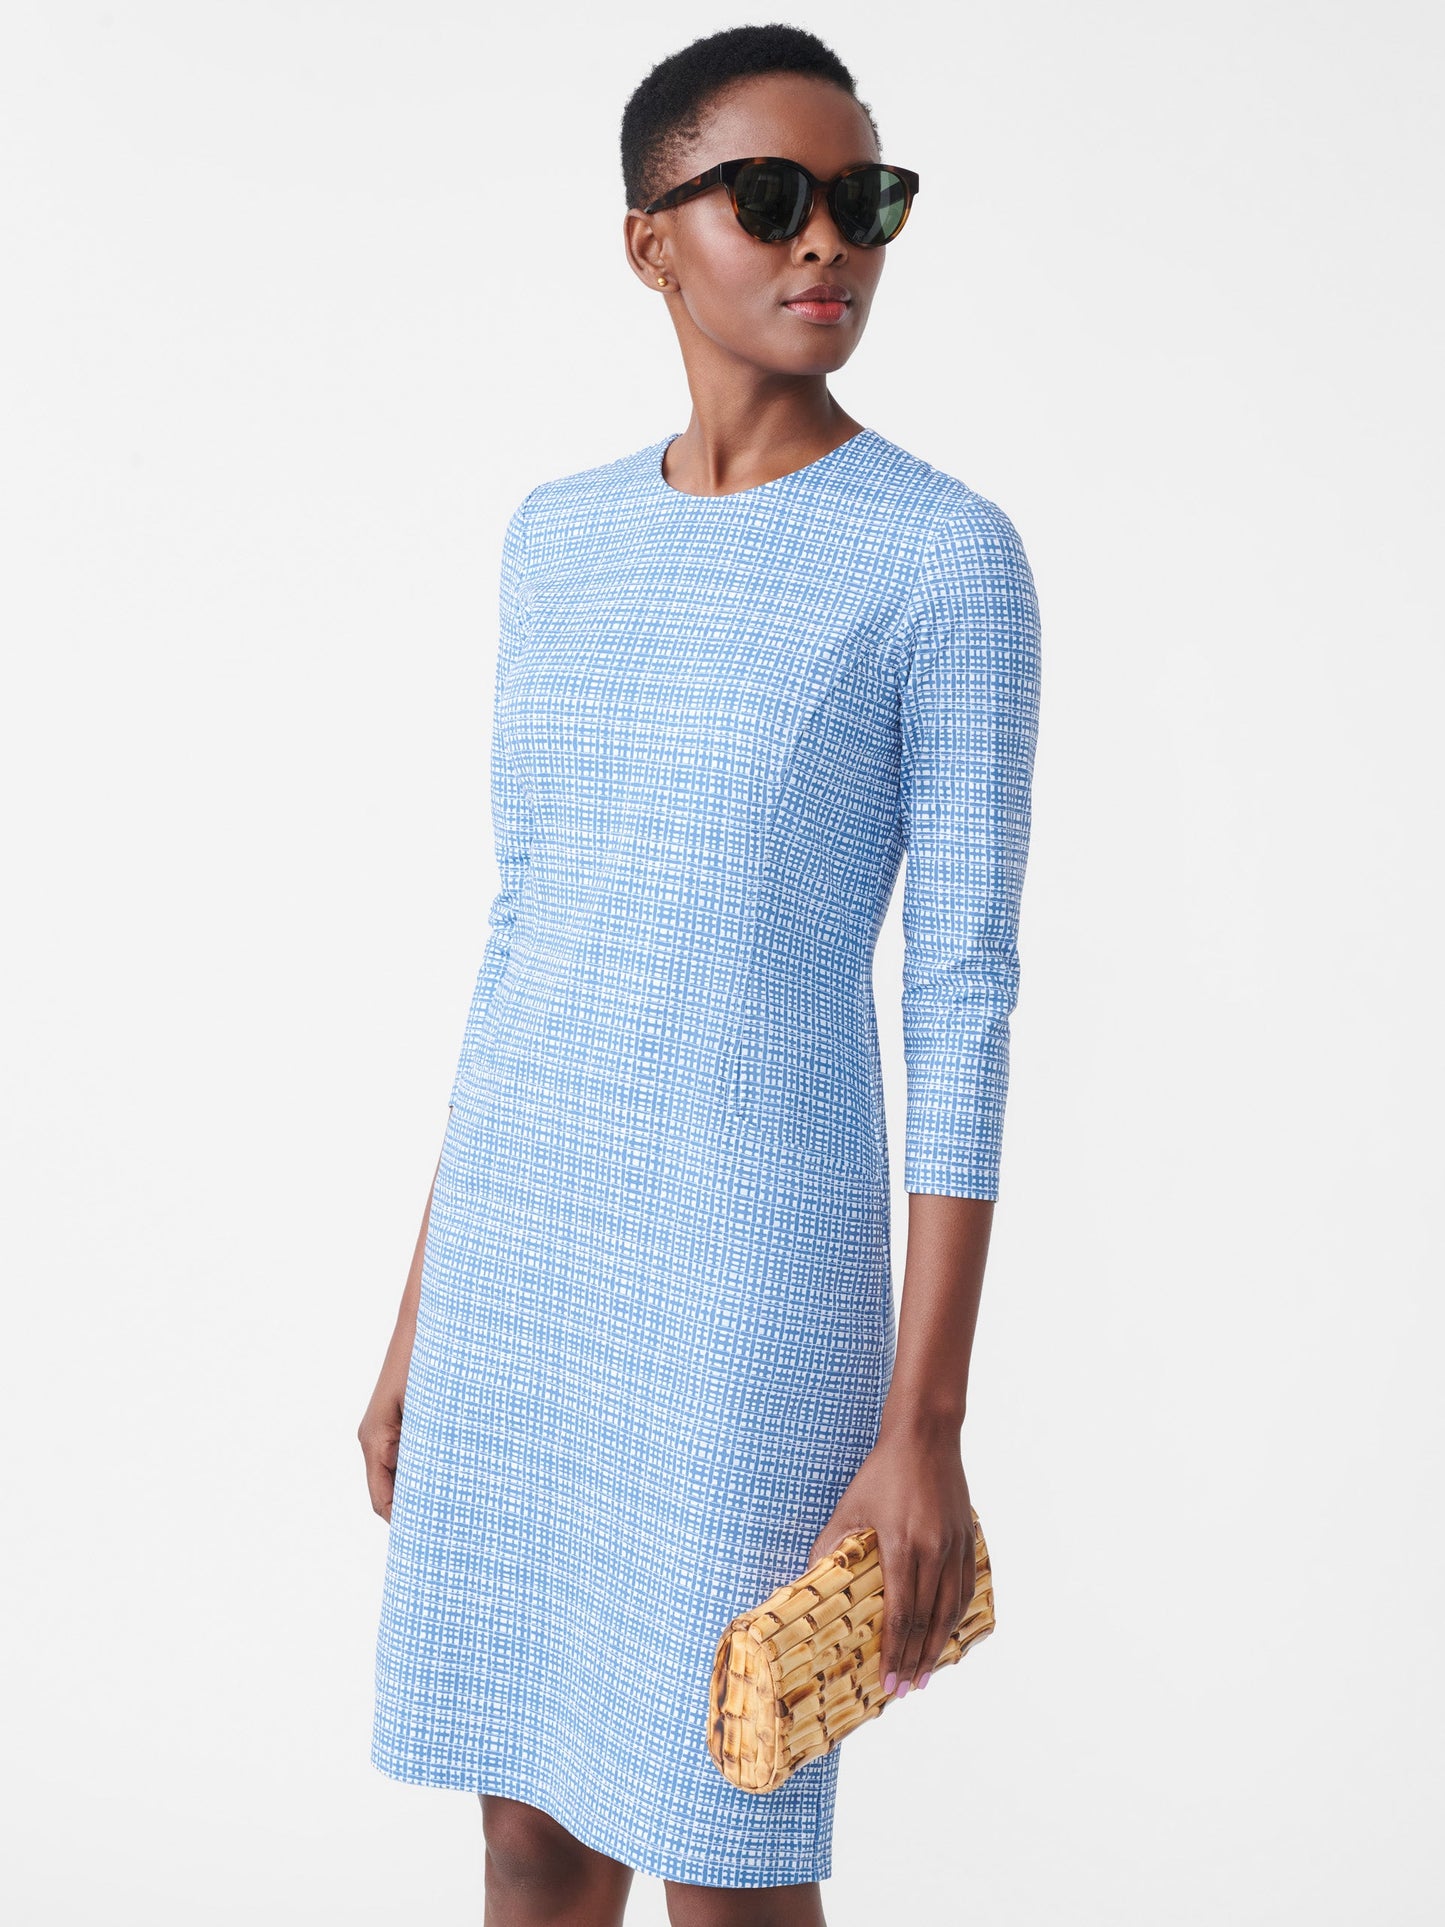 Model wearing J.McLaughlin Catalyst dress in blue/cream made with Catalina cloth.